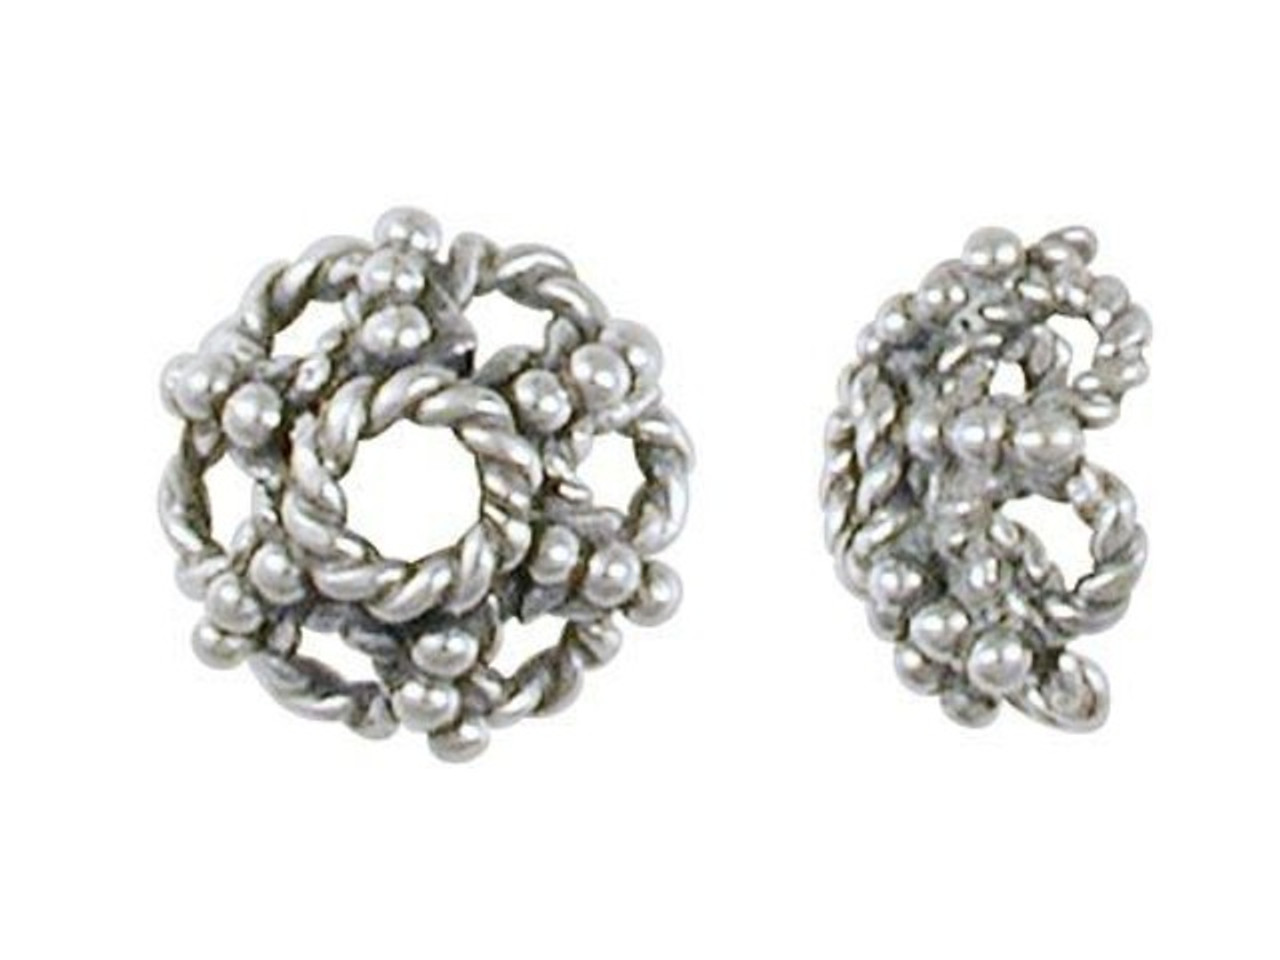 Bali Sterling Silver Beads | Bead Caps | Scalloped Skirt | 6mm Diameter x  3.5mm | 2 pieces